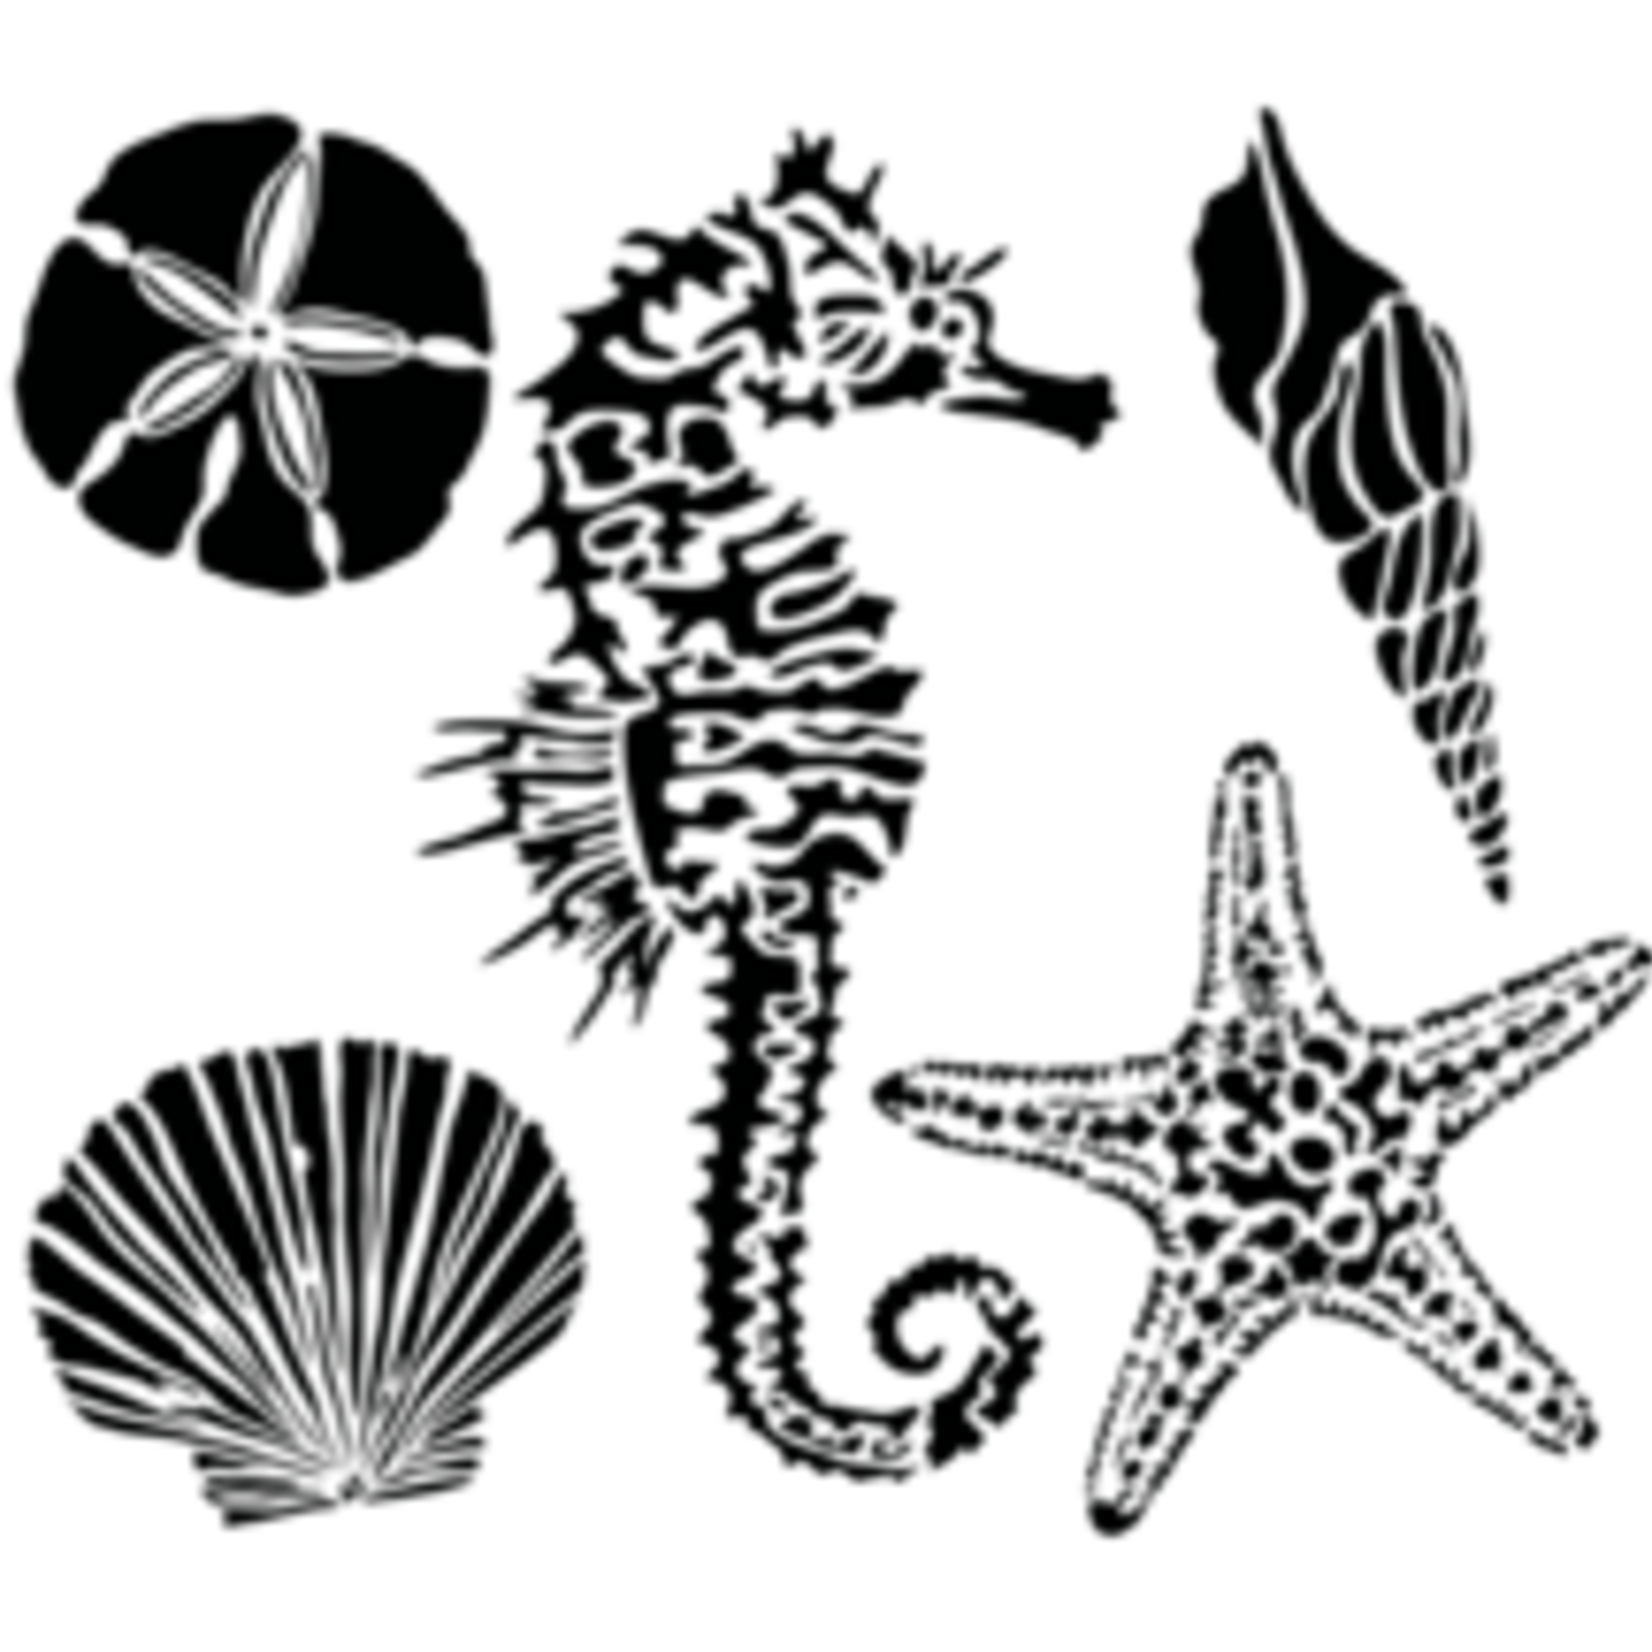 THE CRAFTERS WORKSHOP STENCIL 6X6 TCW496S MINI SEA CREATURES